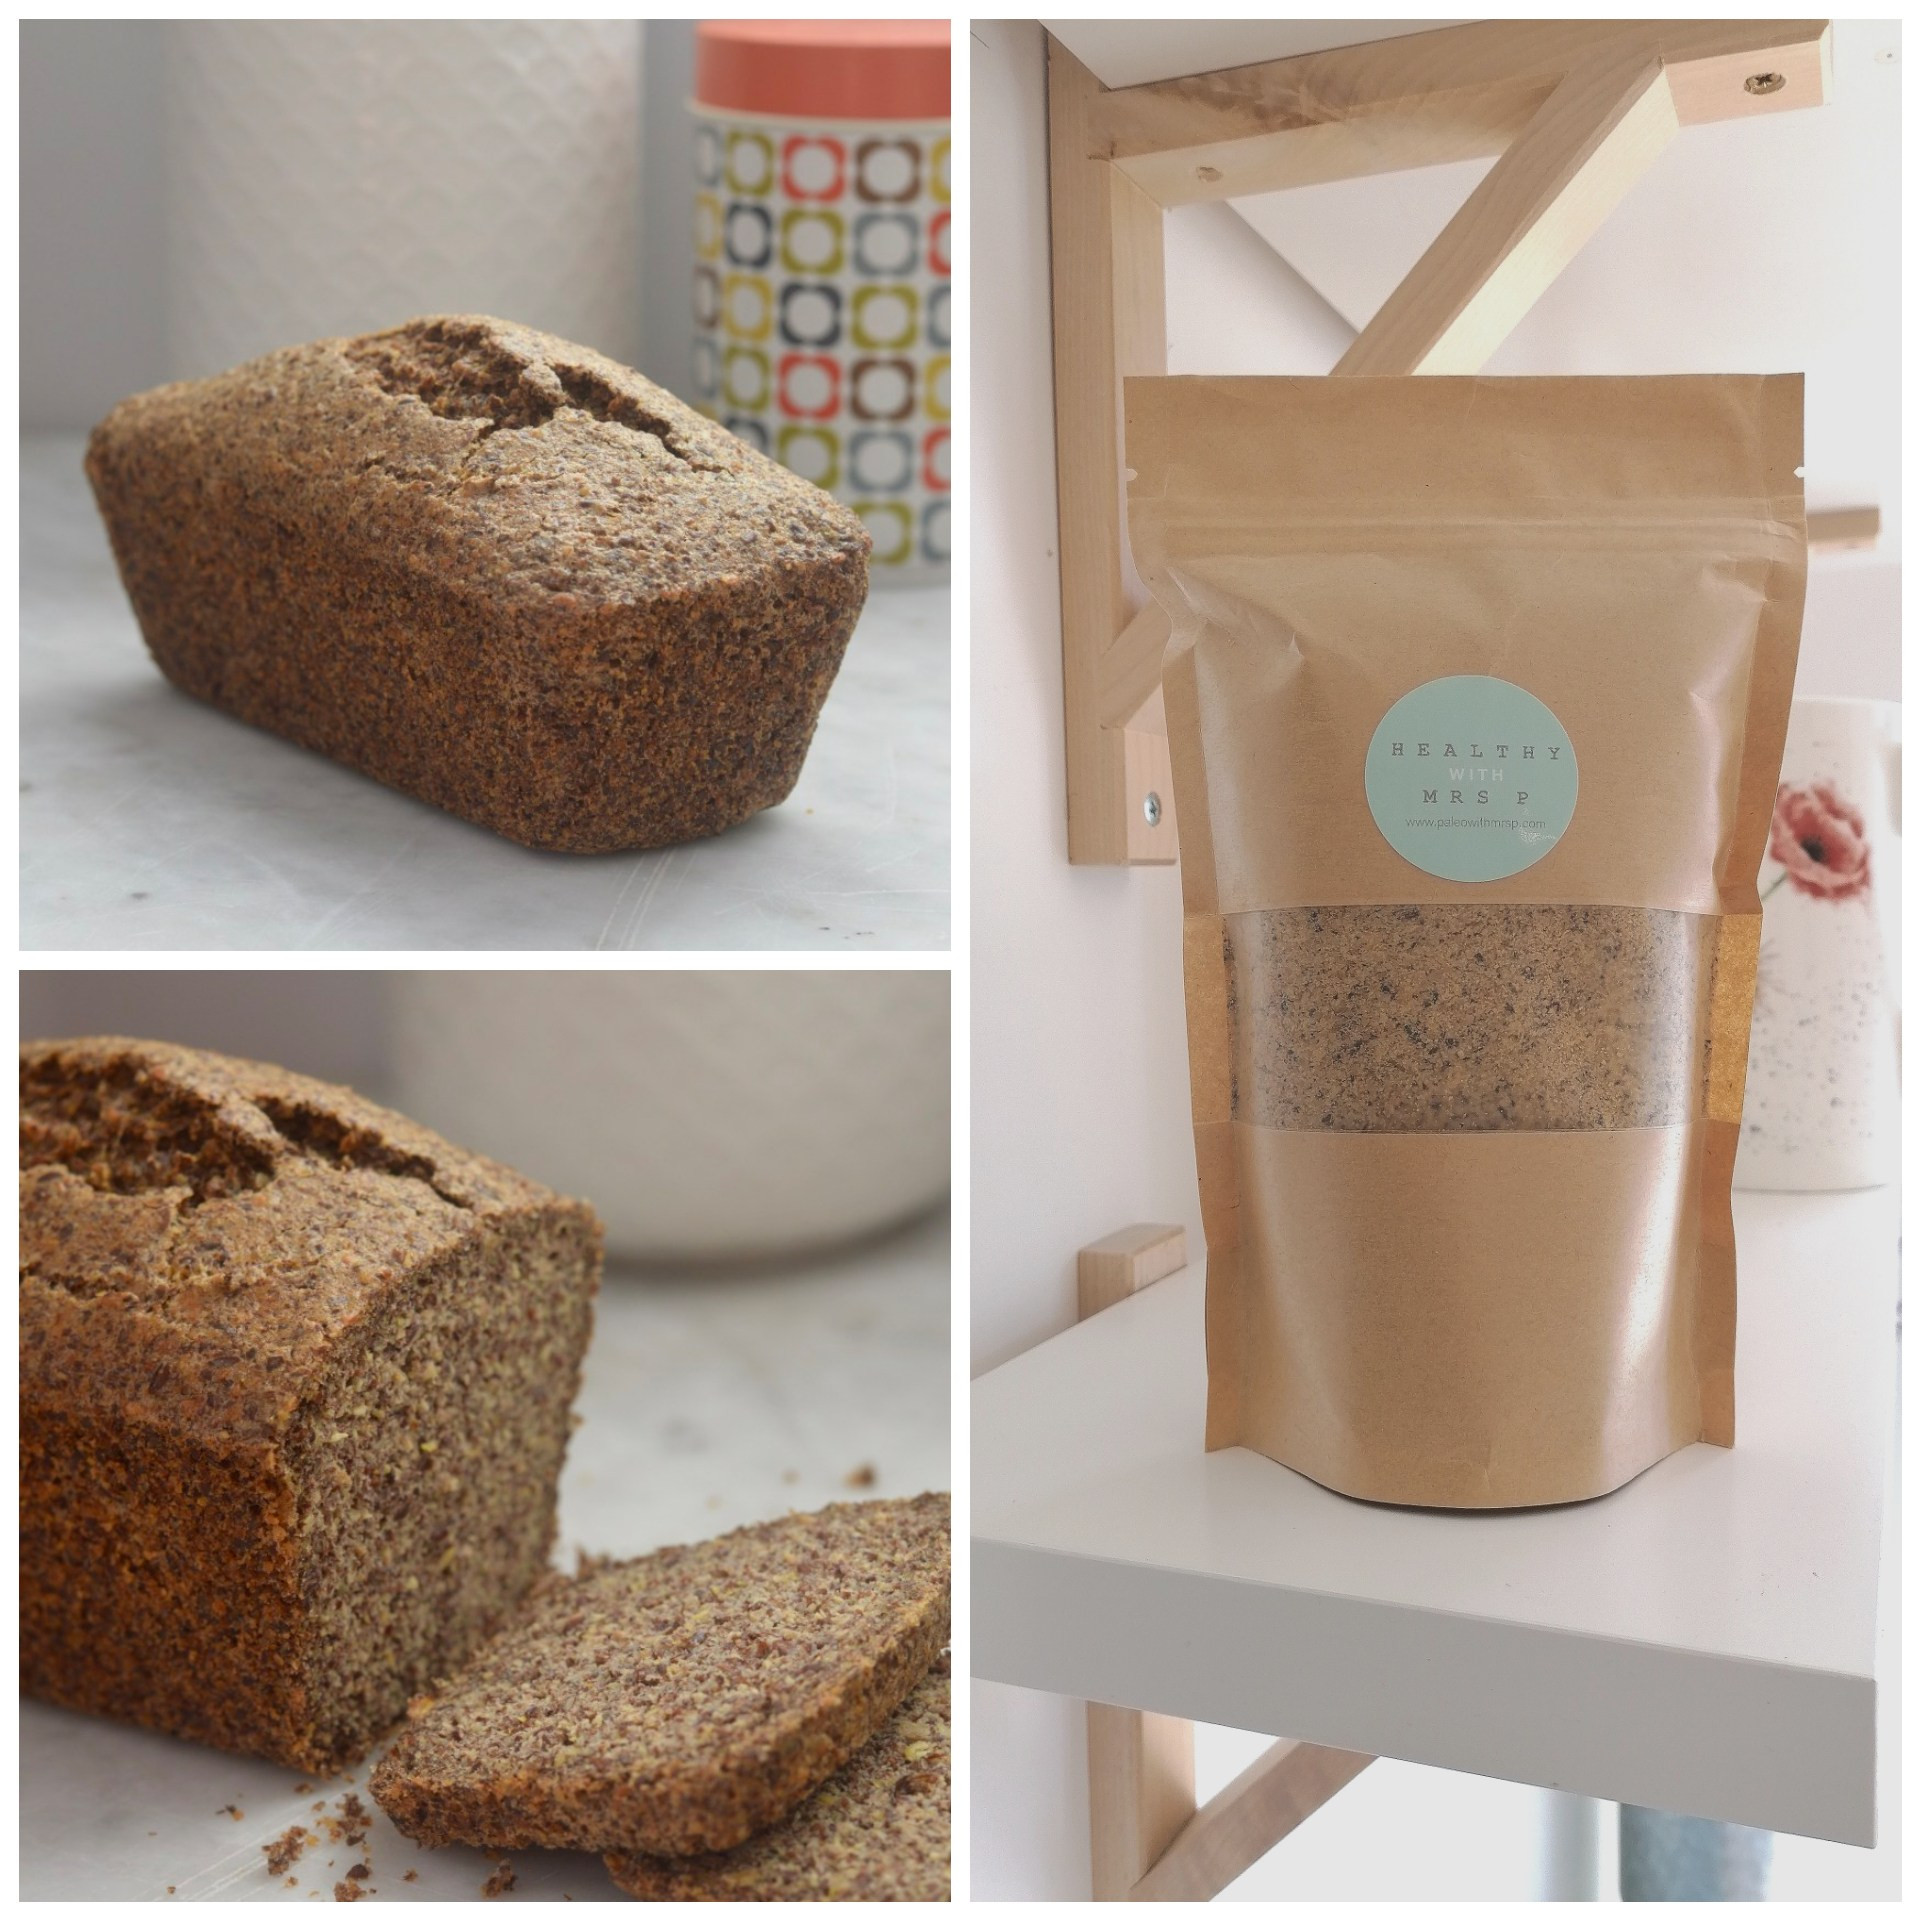 Diedre's Kitchen Low Carb Bread
 Low carb bread in a bag